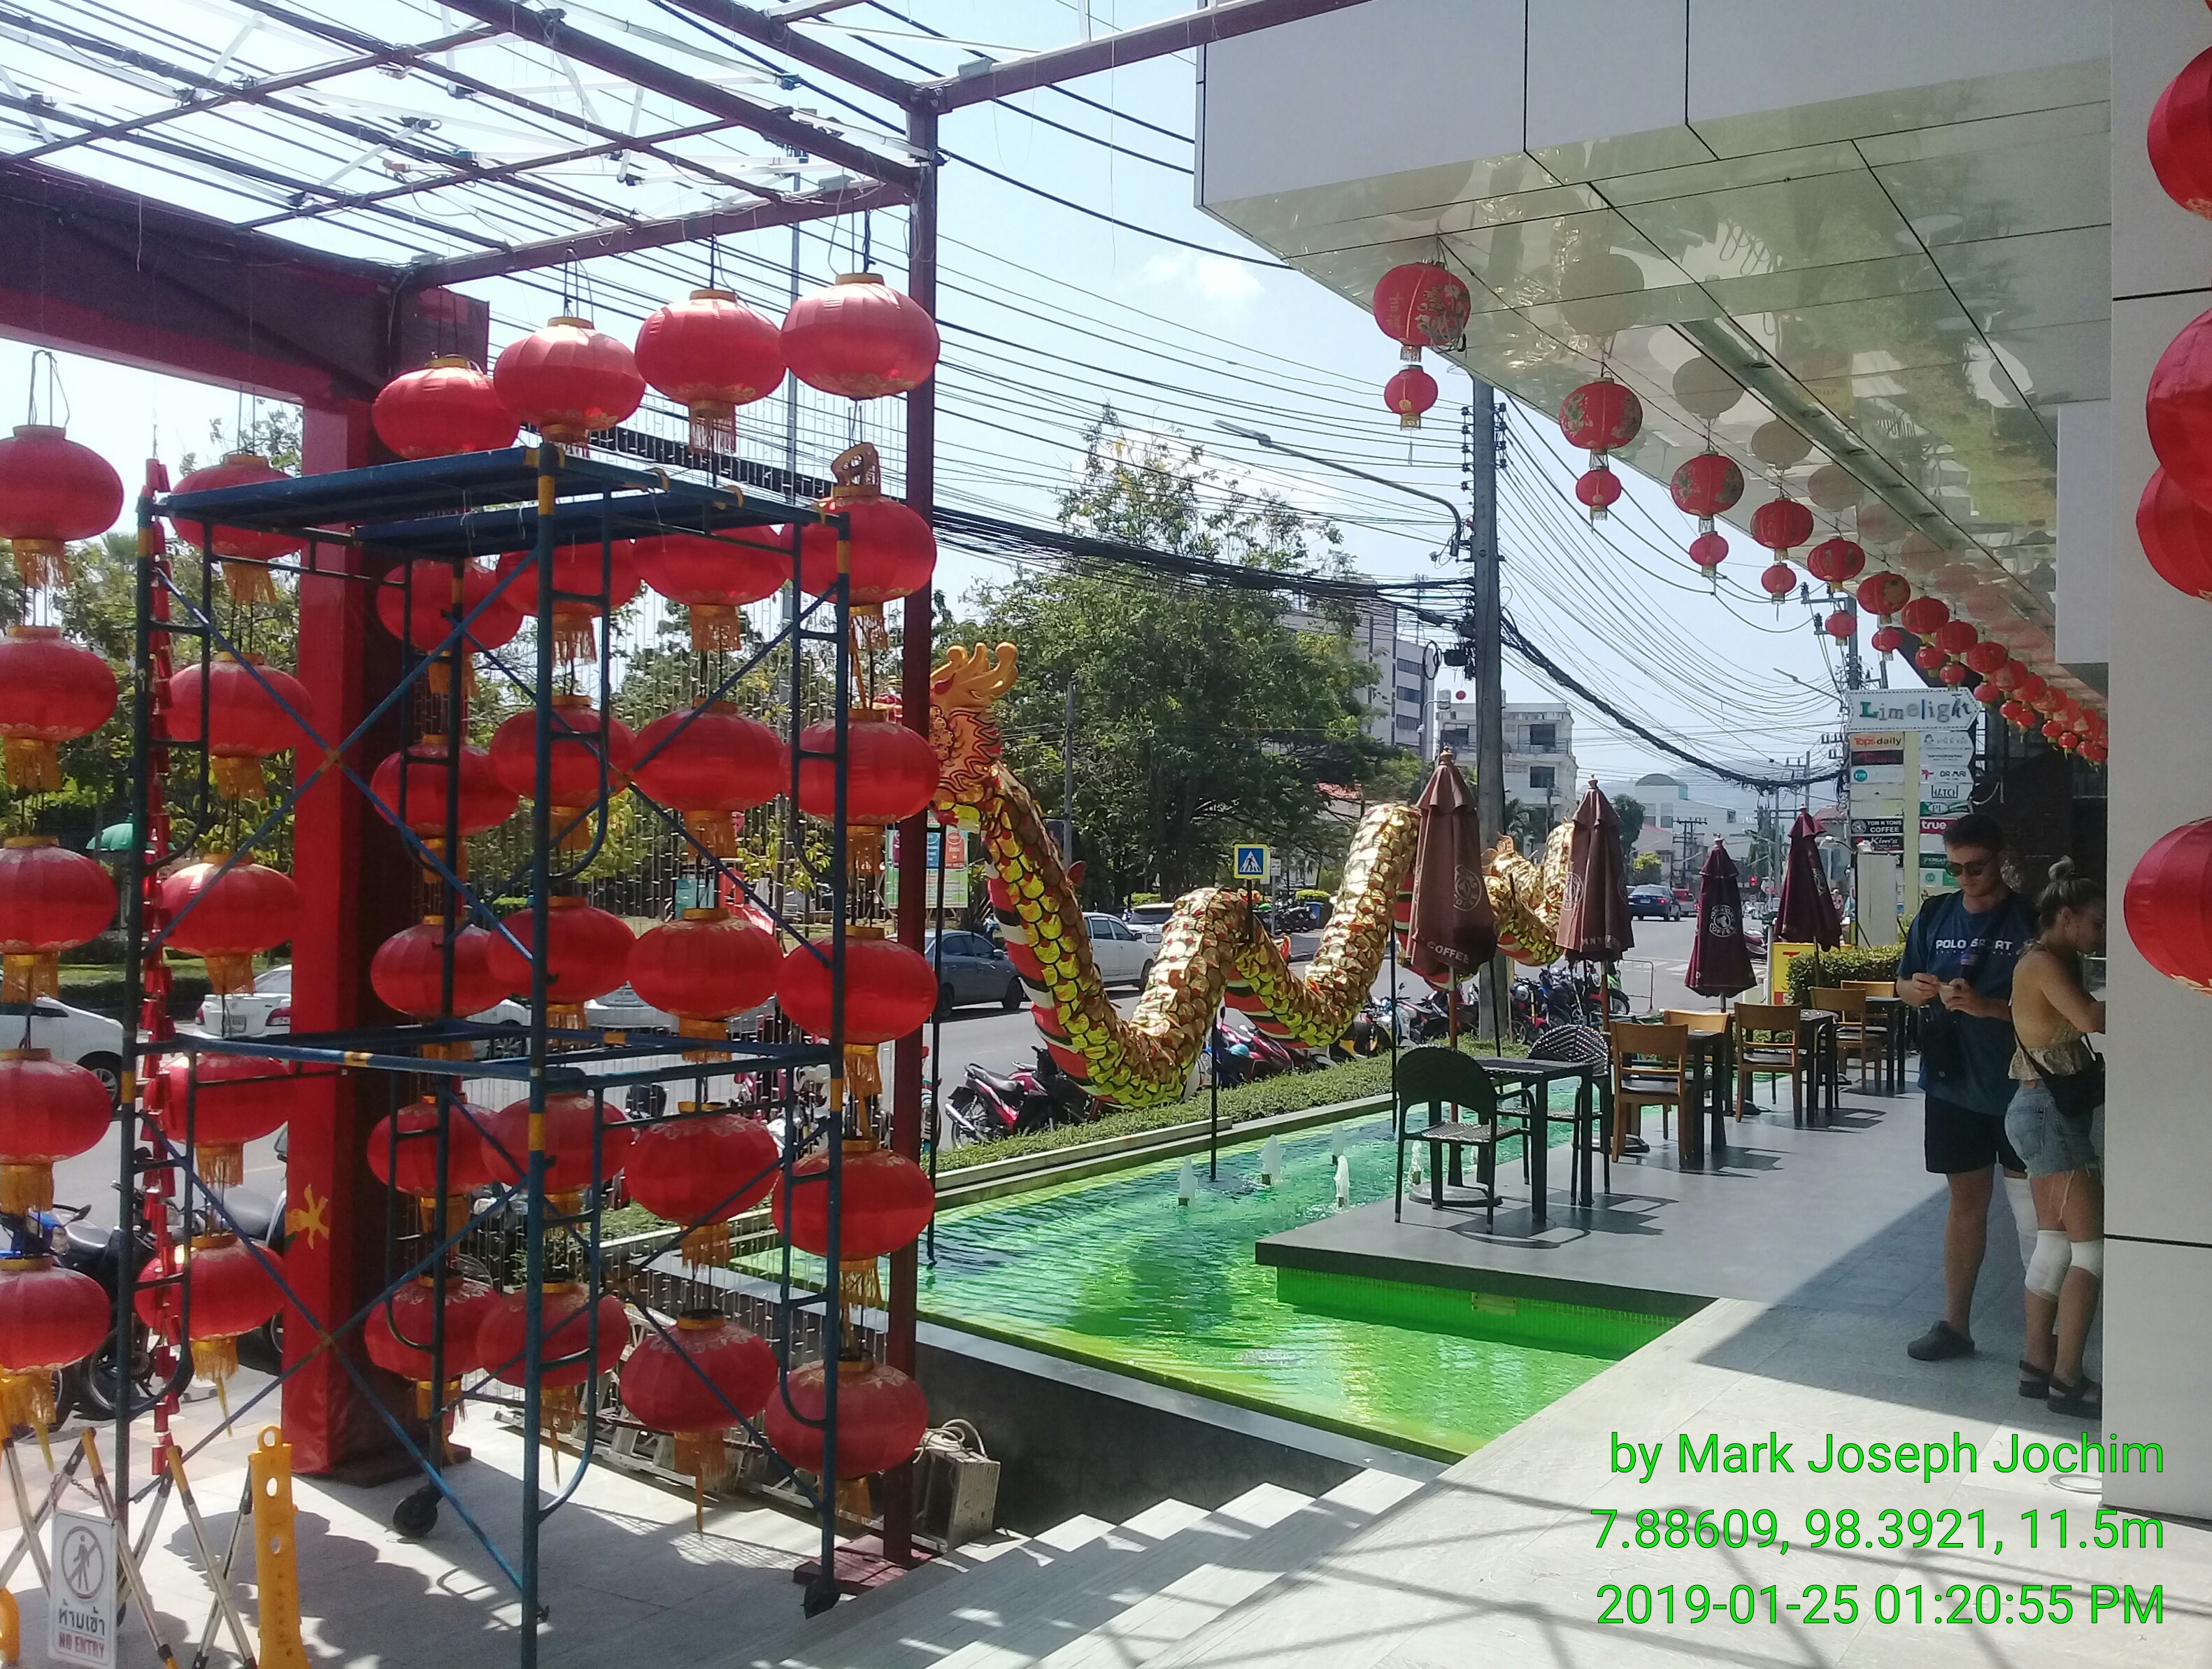 Decorations for Chinese New Year at Limelight Avenue -- a shopping center and market area north of Queen Sirikit Park in Phuket Town, Thailand. Photos taken by Mark Joseph Jochim on January 25, 2019.